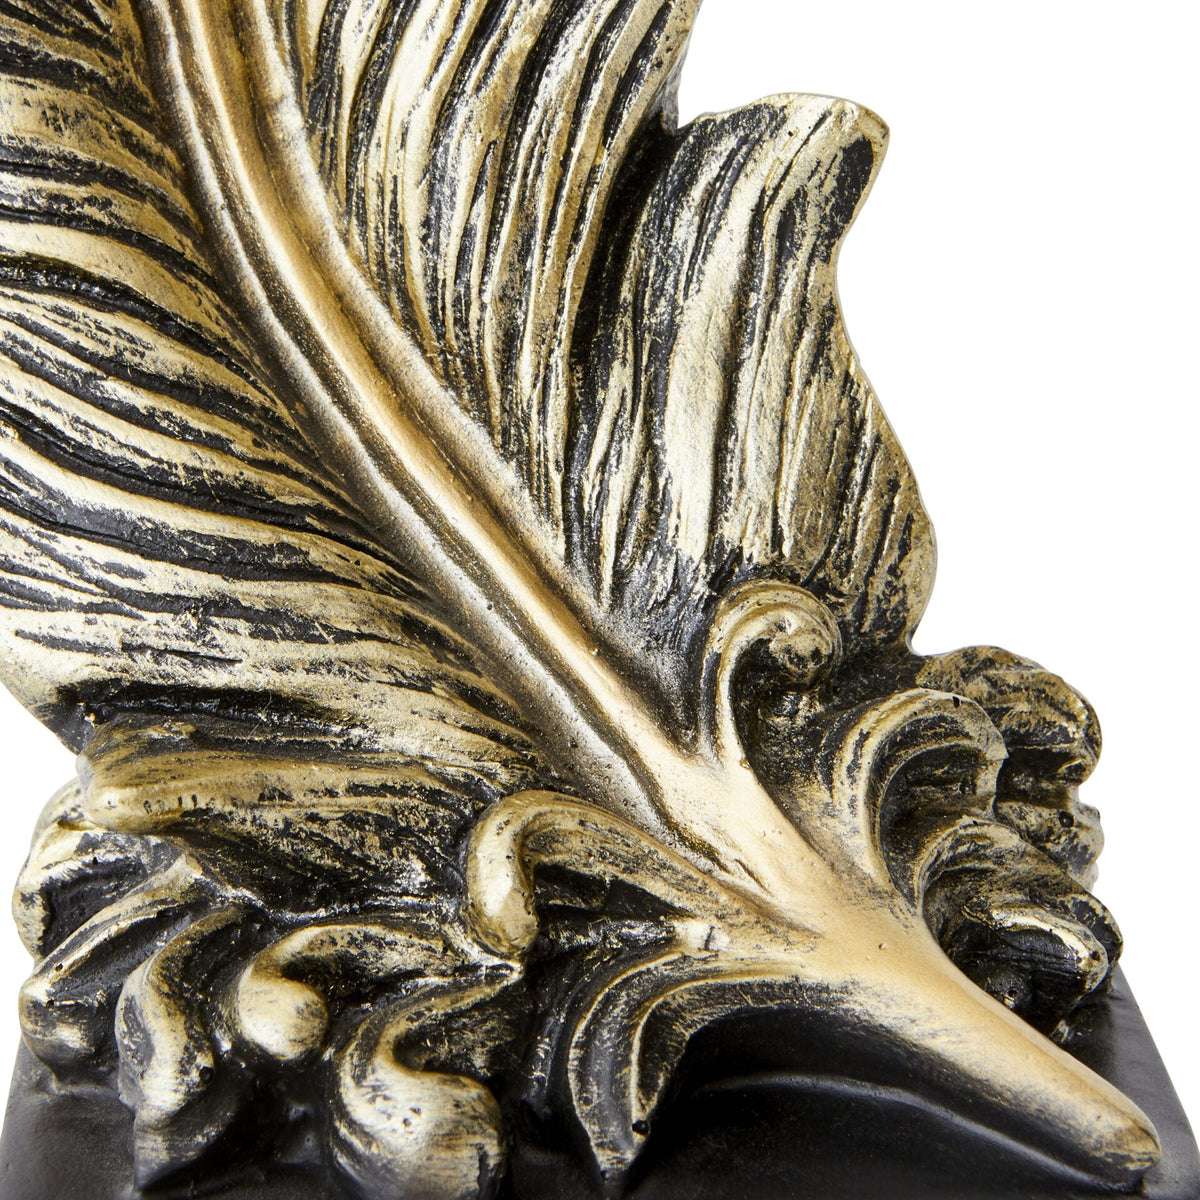 Upright Feather Sculpture in Resin - Gold - Notbrand